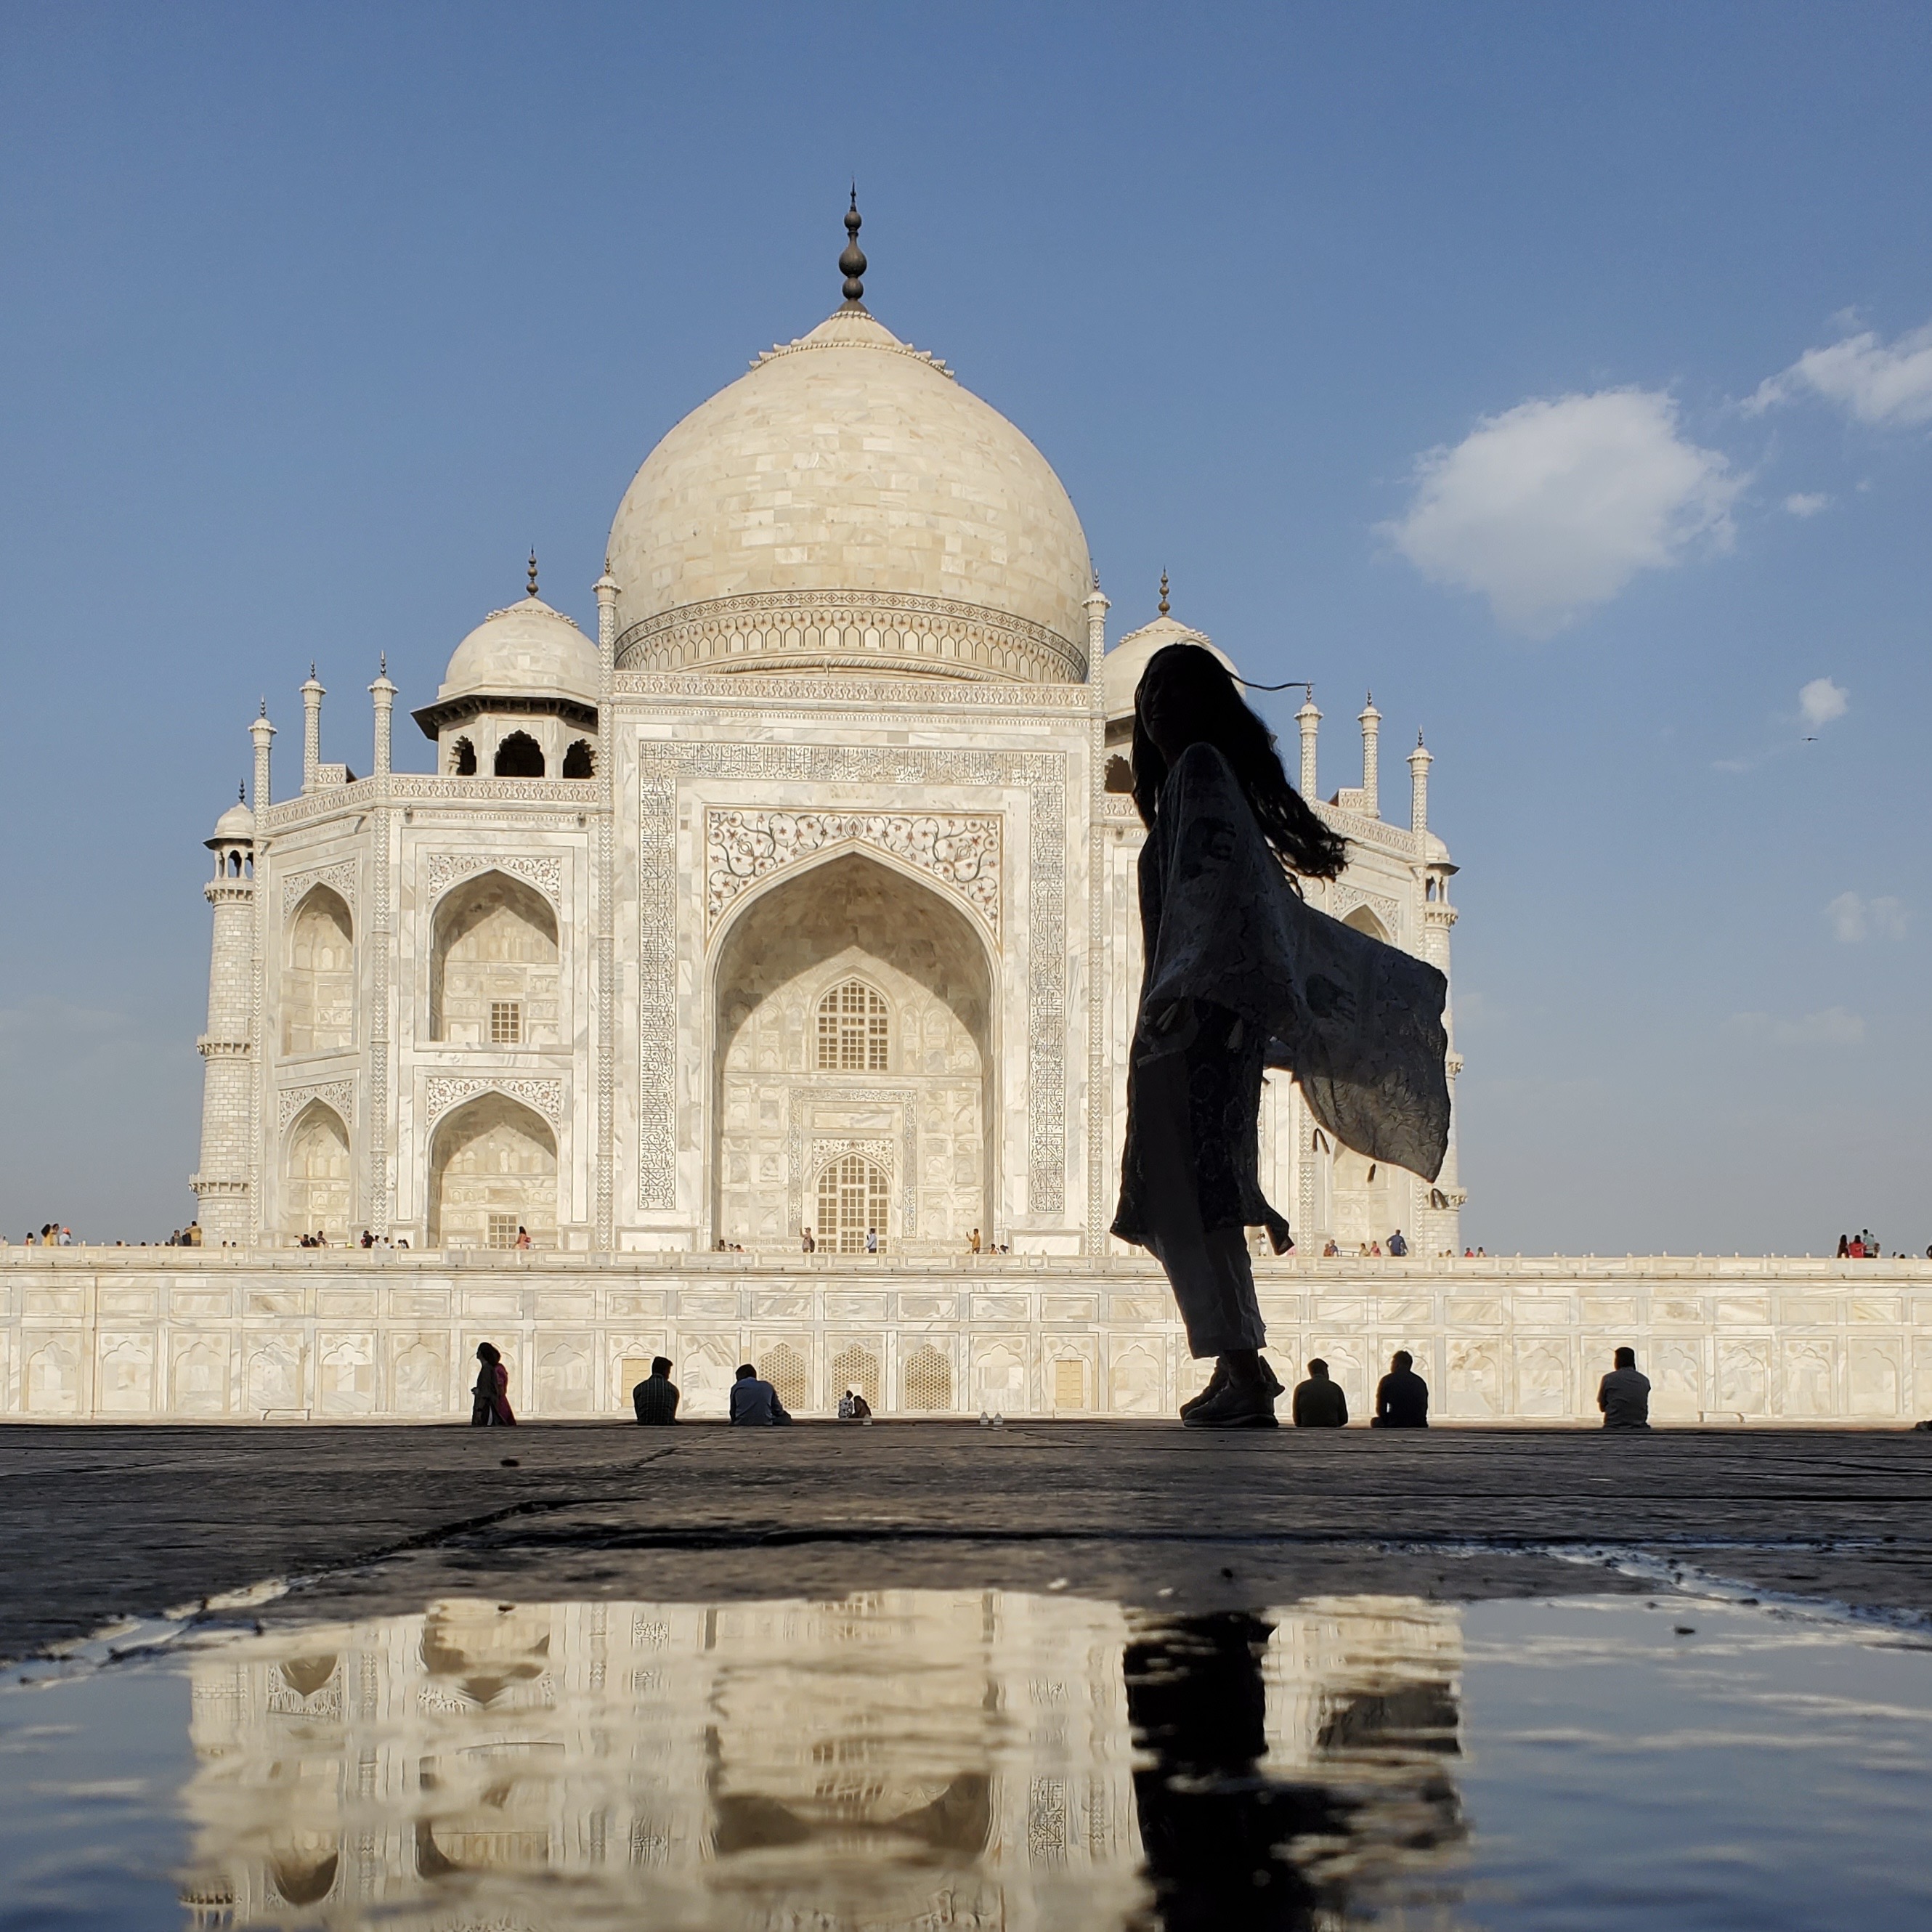 Jessica is seen mostly in shadow in front of the Taj Mahal